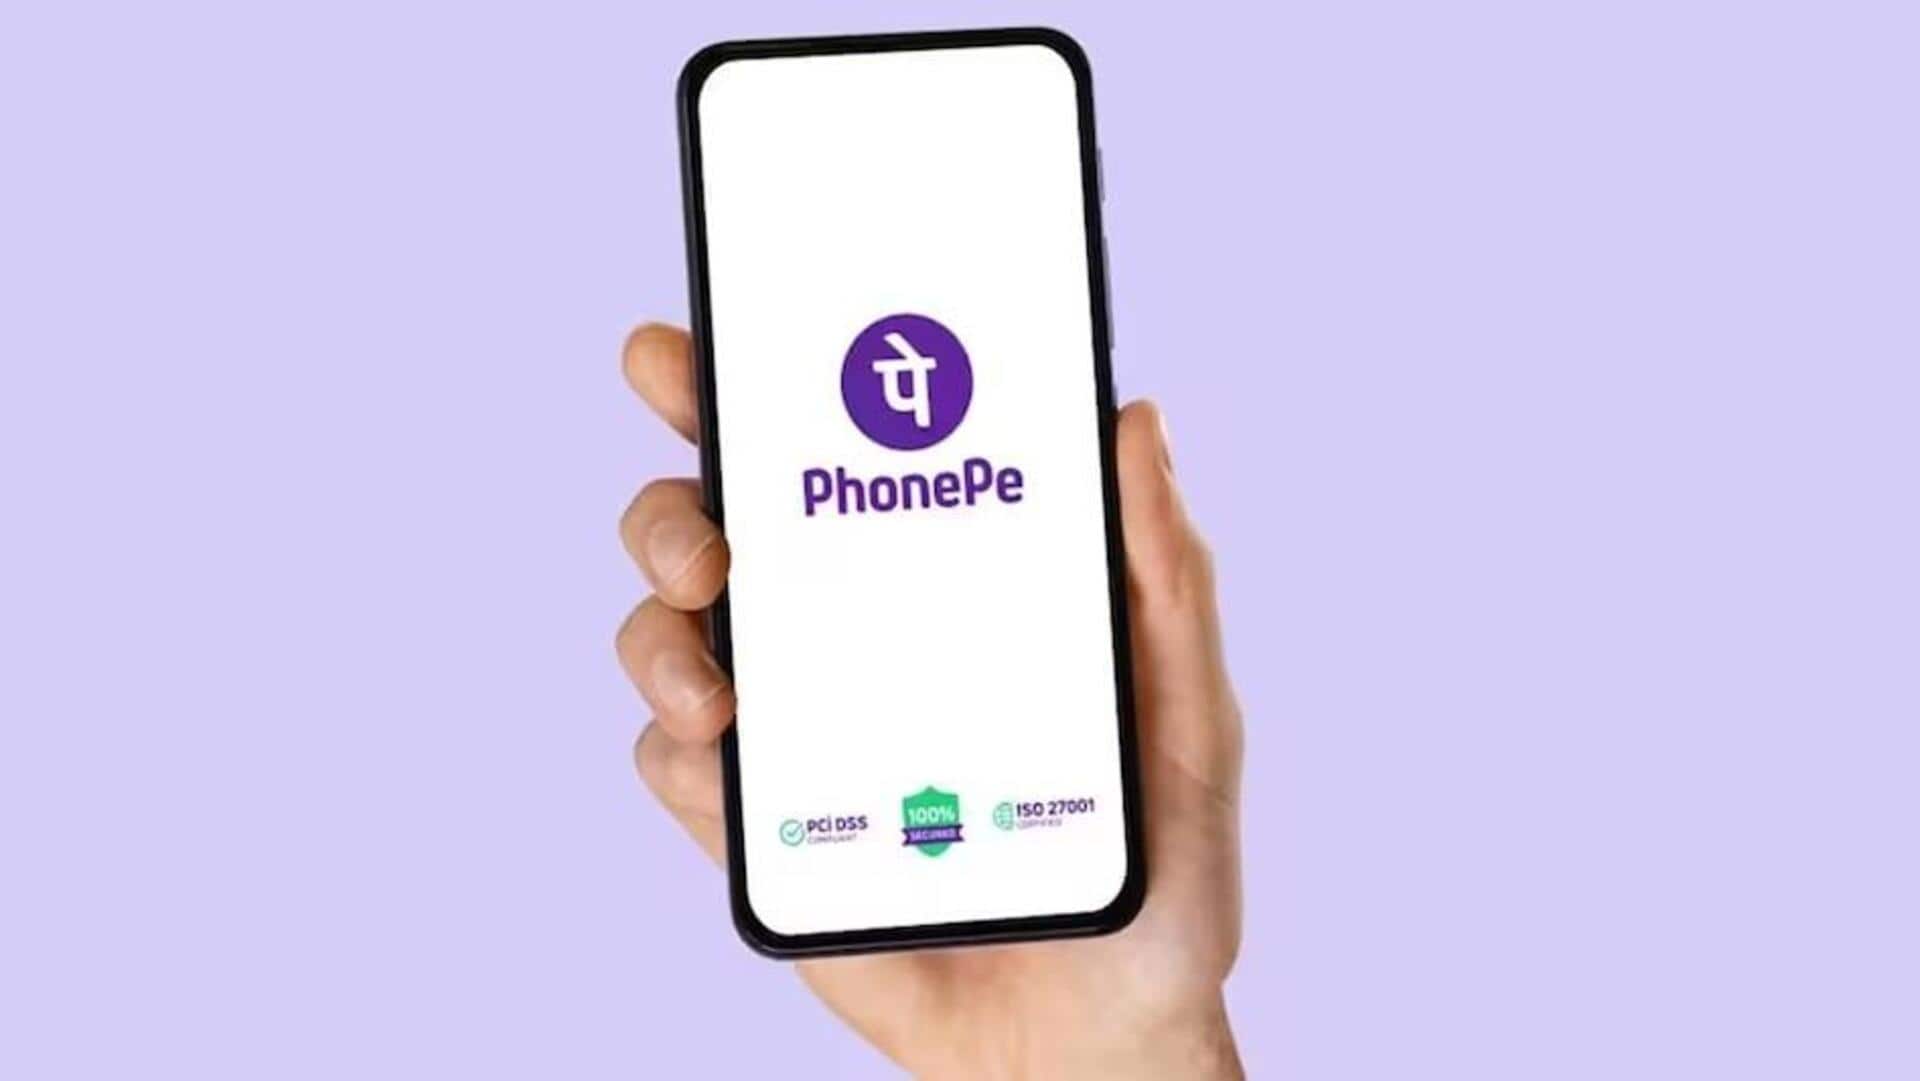 PhonePe now offers ACKO's car and bike insurance policies